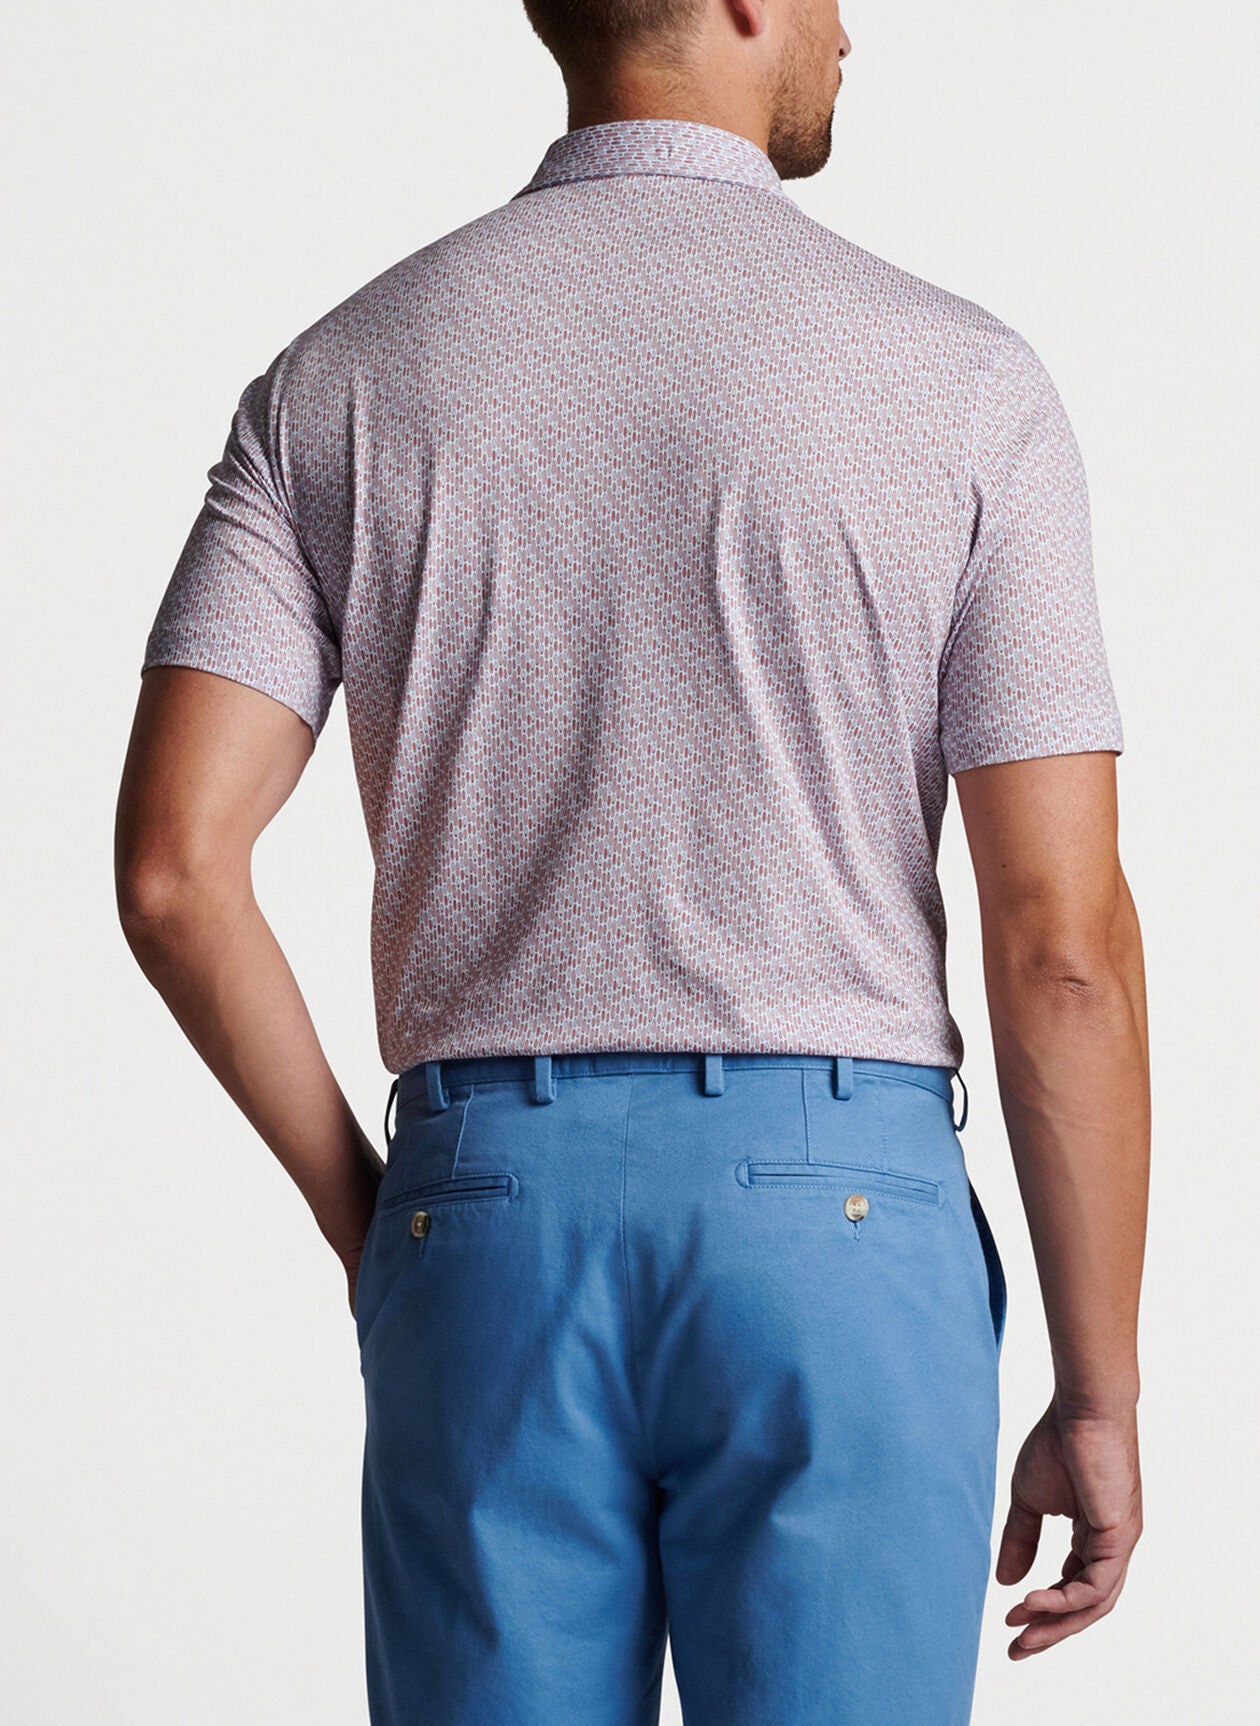 Pilot Mill Surf's Up Printed Polo- Sunwashed Brick